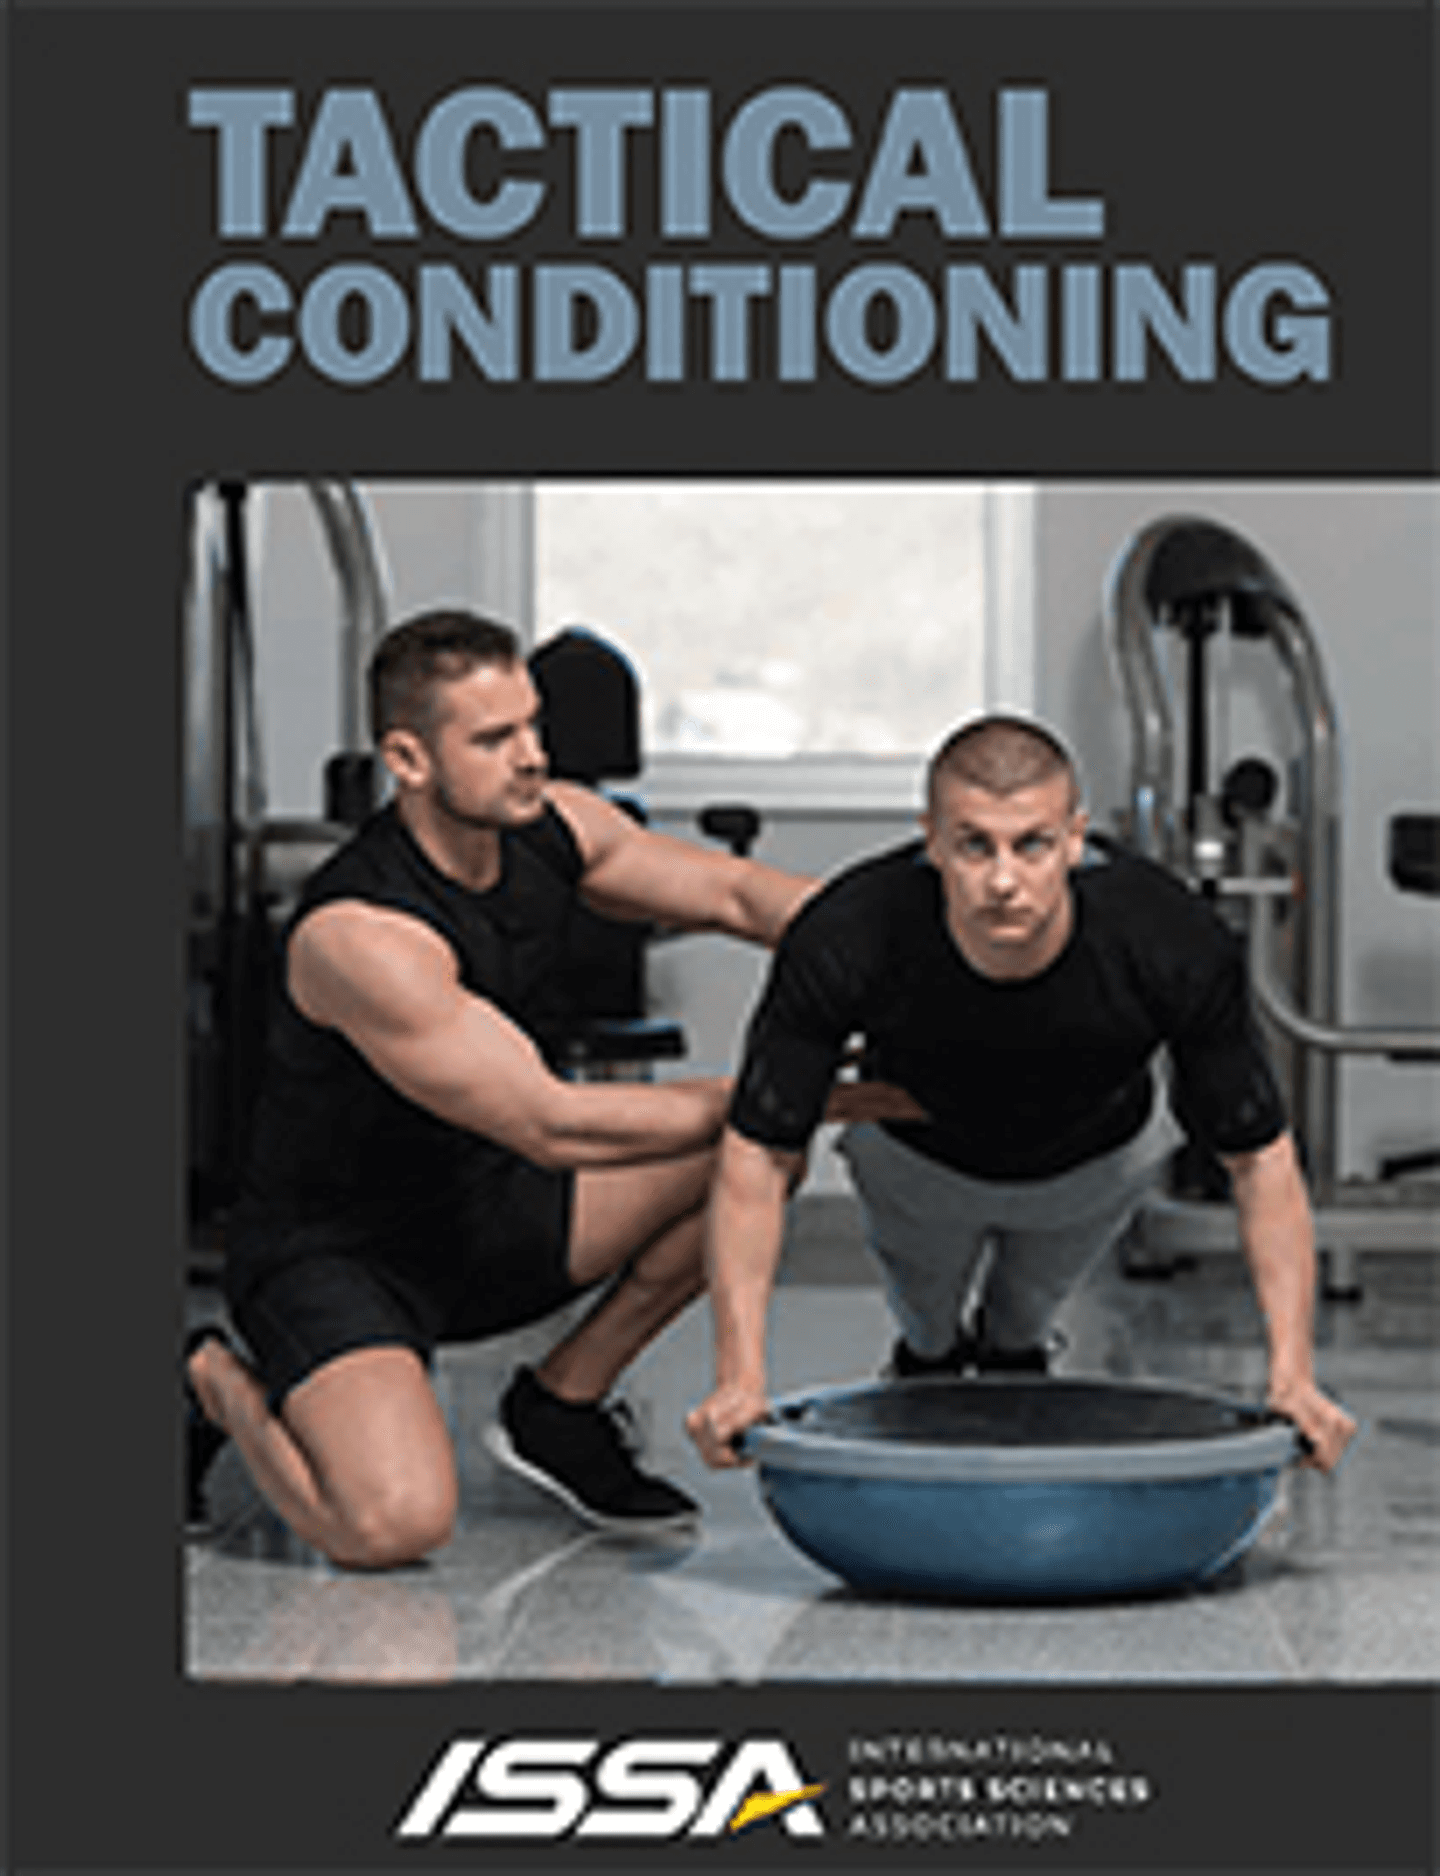 Tactical Conditioning Specialist Course Guide